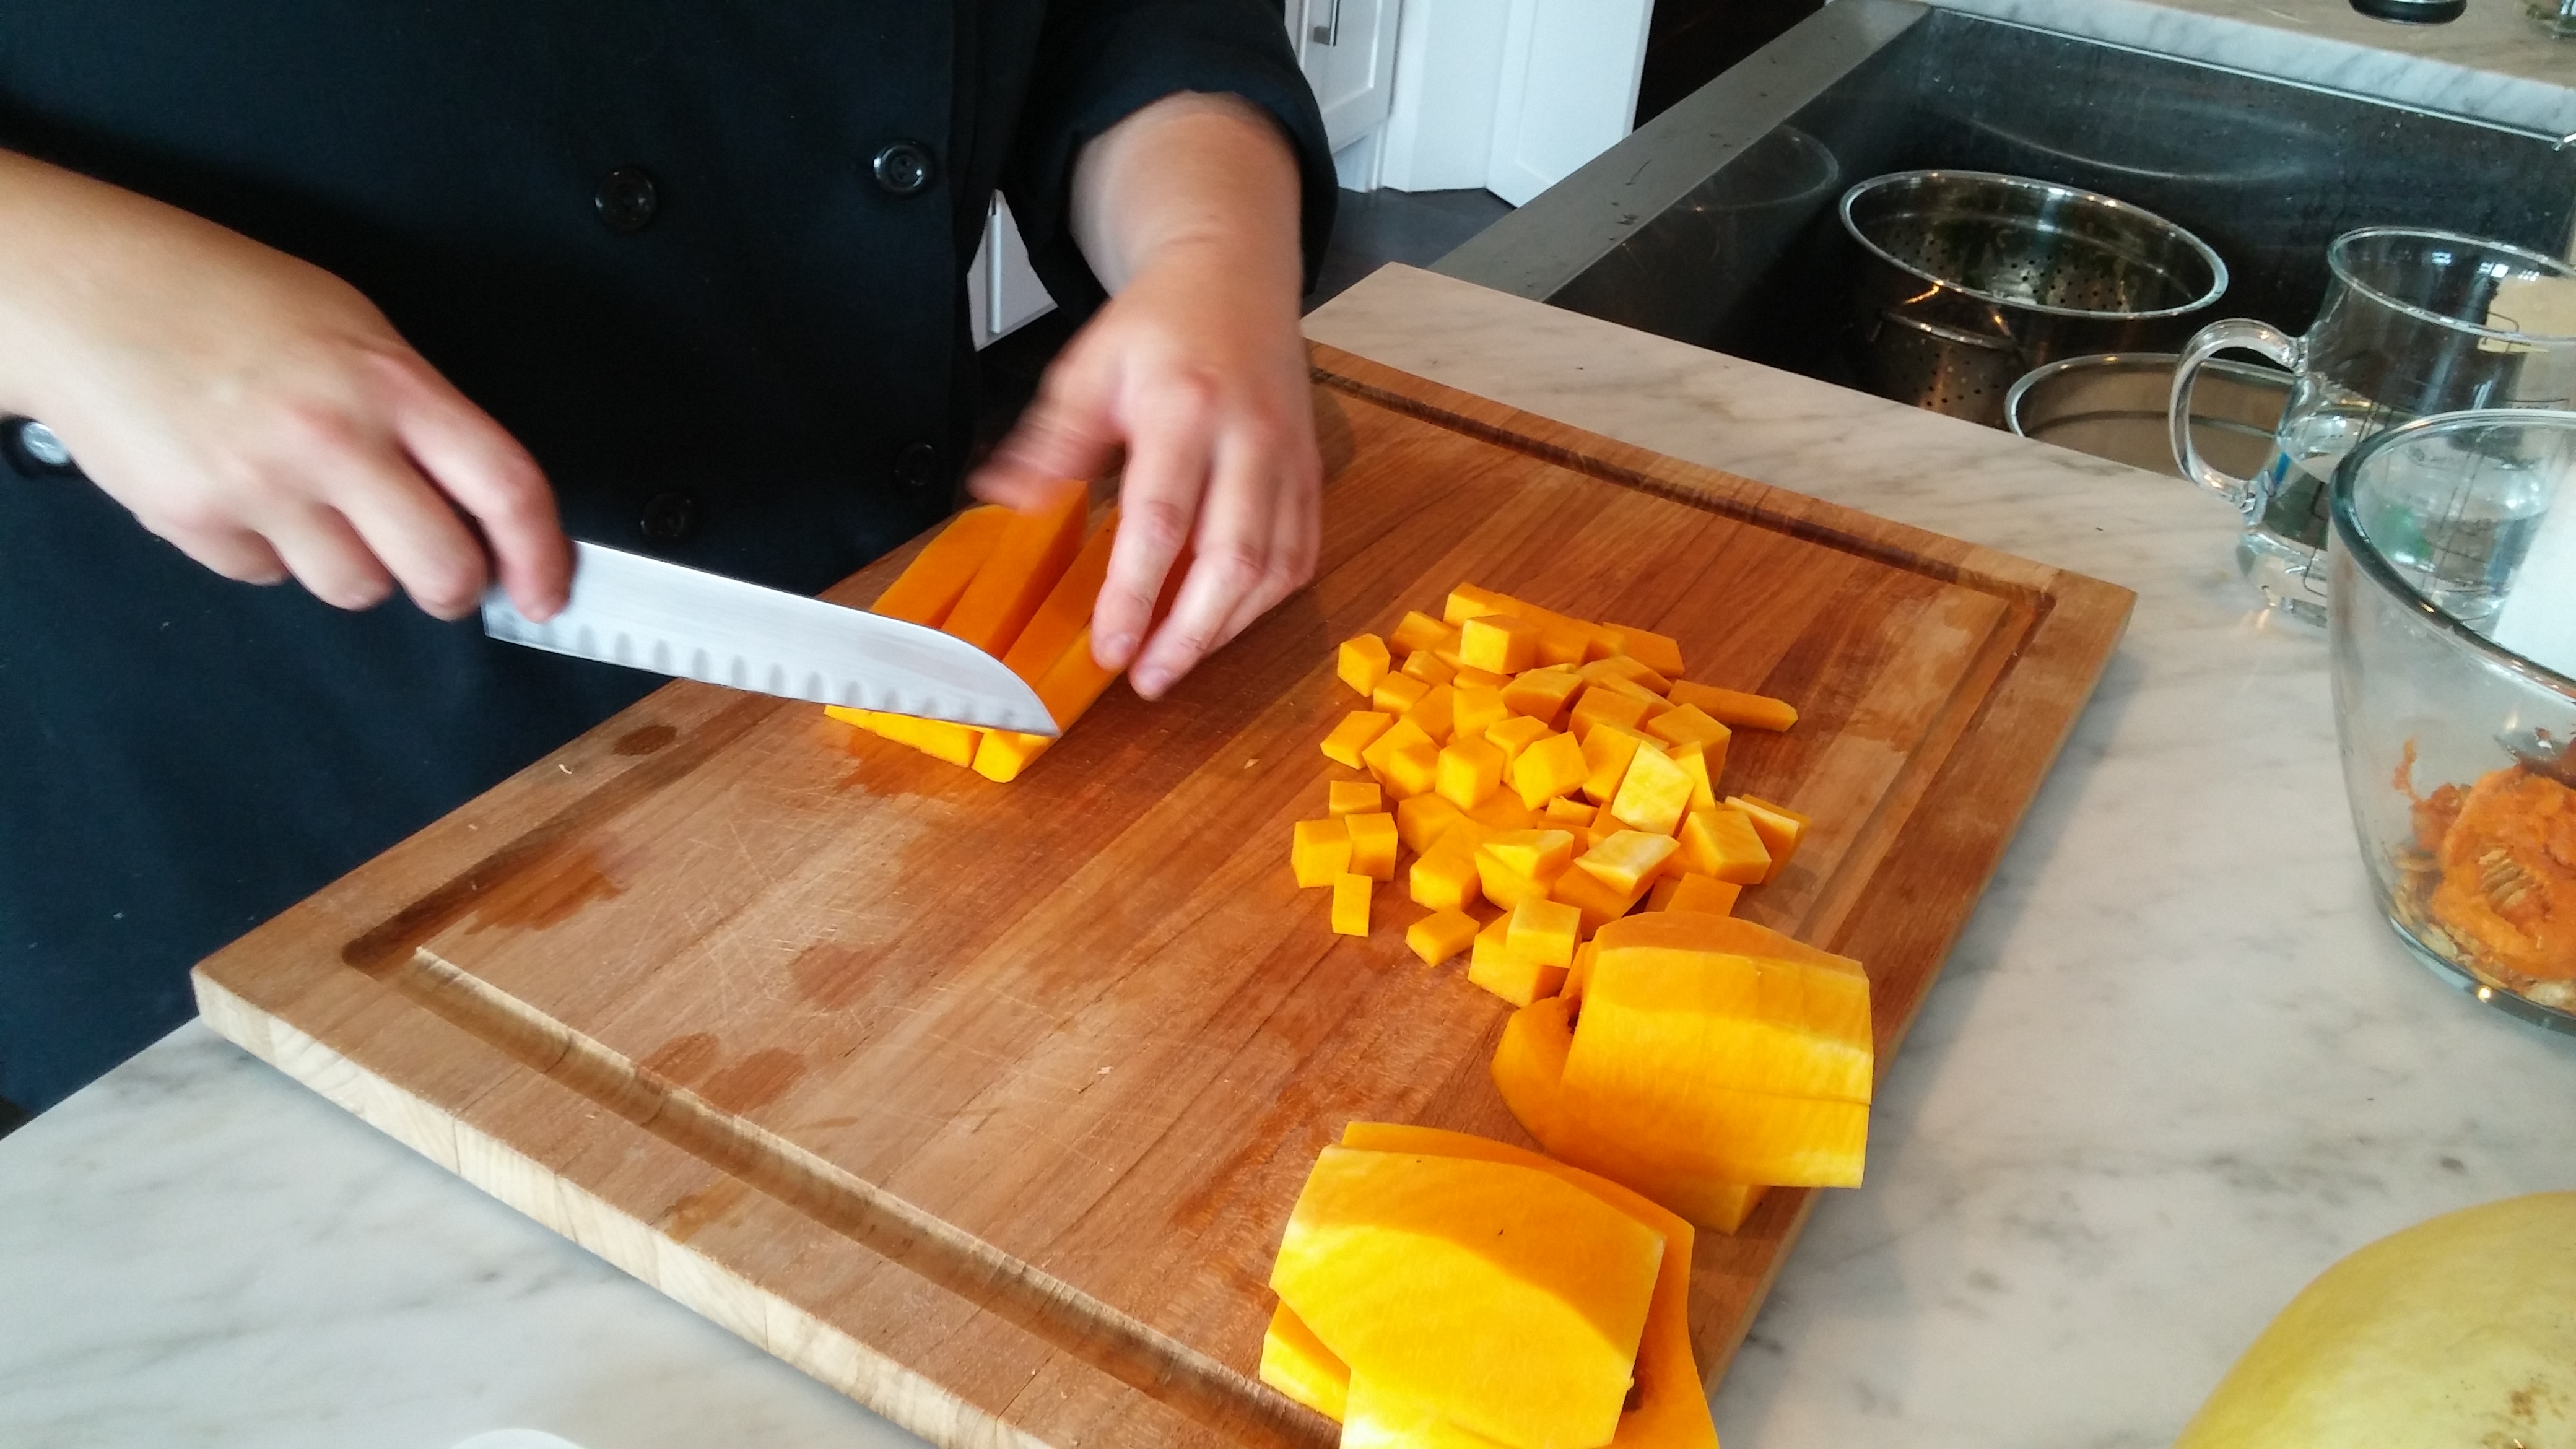 Dice butternut squash to roast as a side or for a salad. 